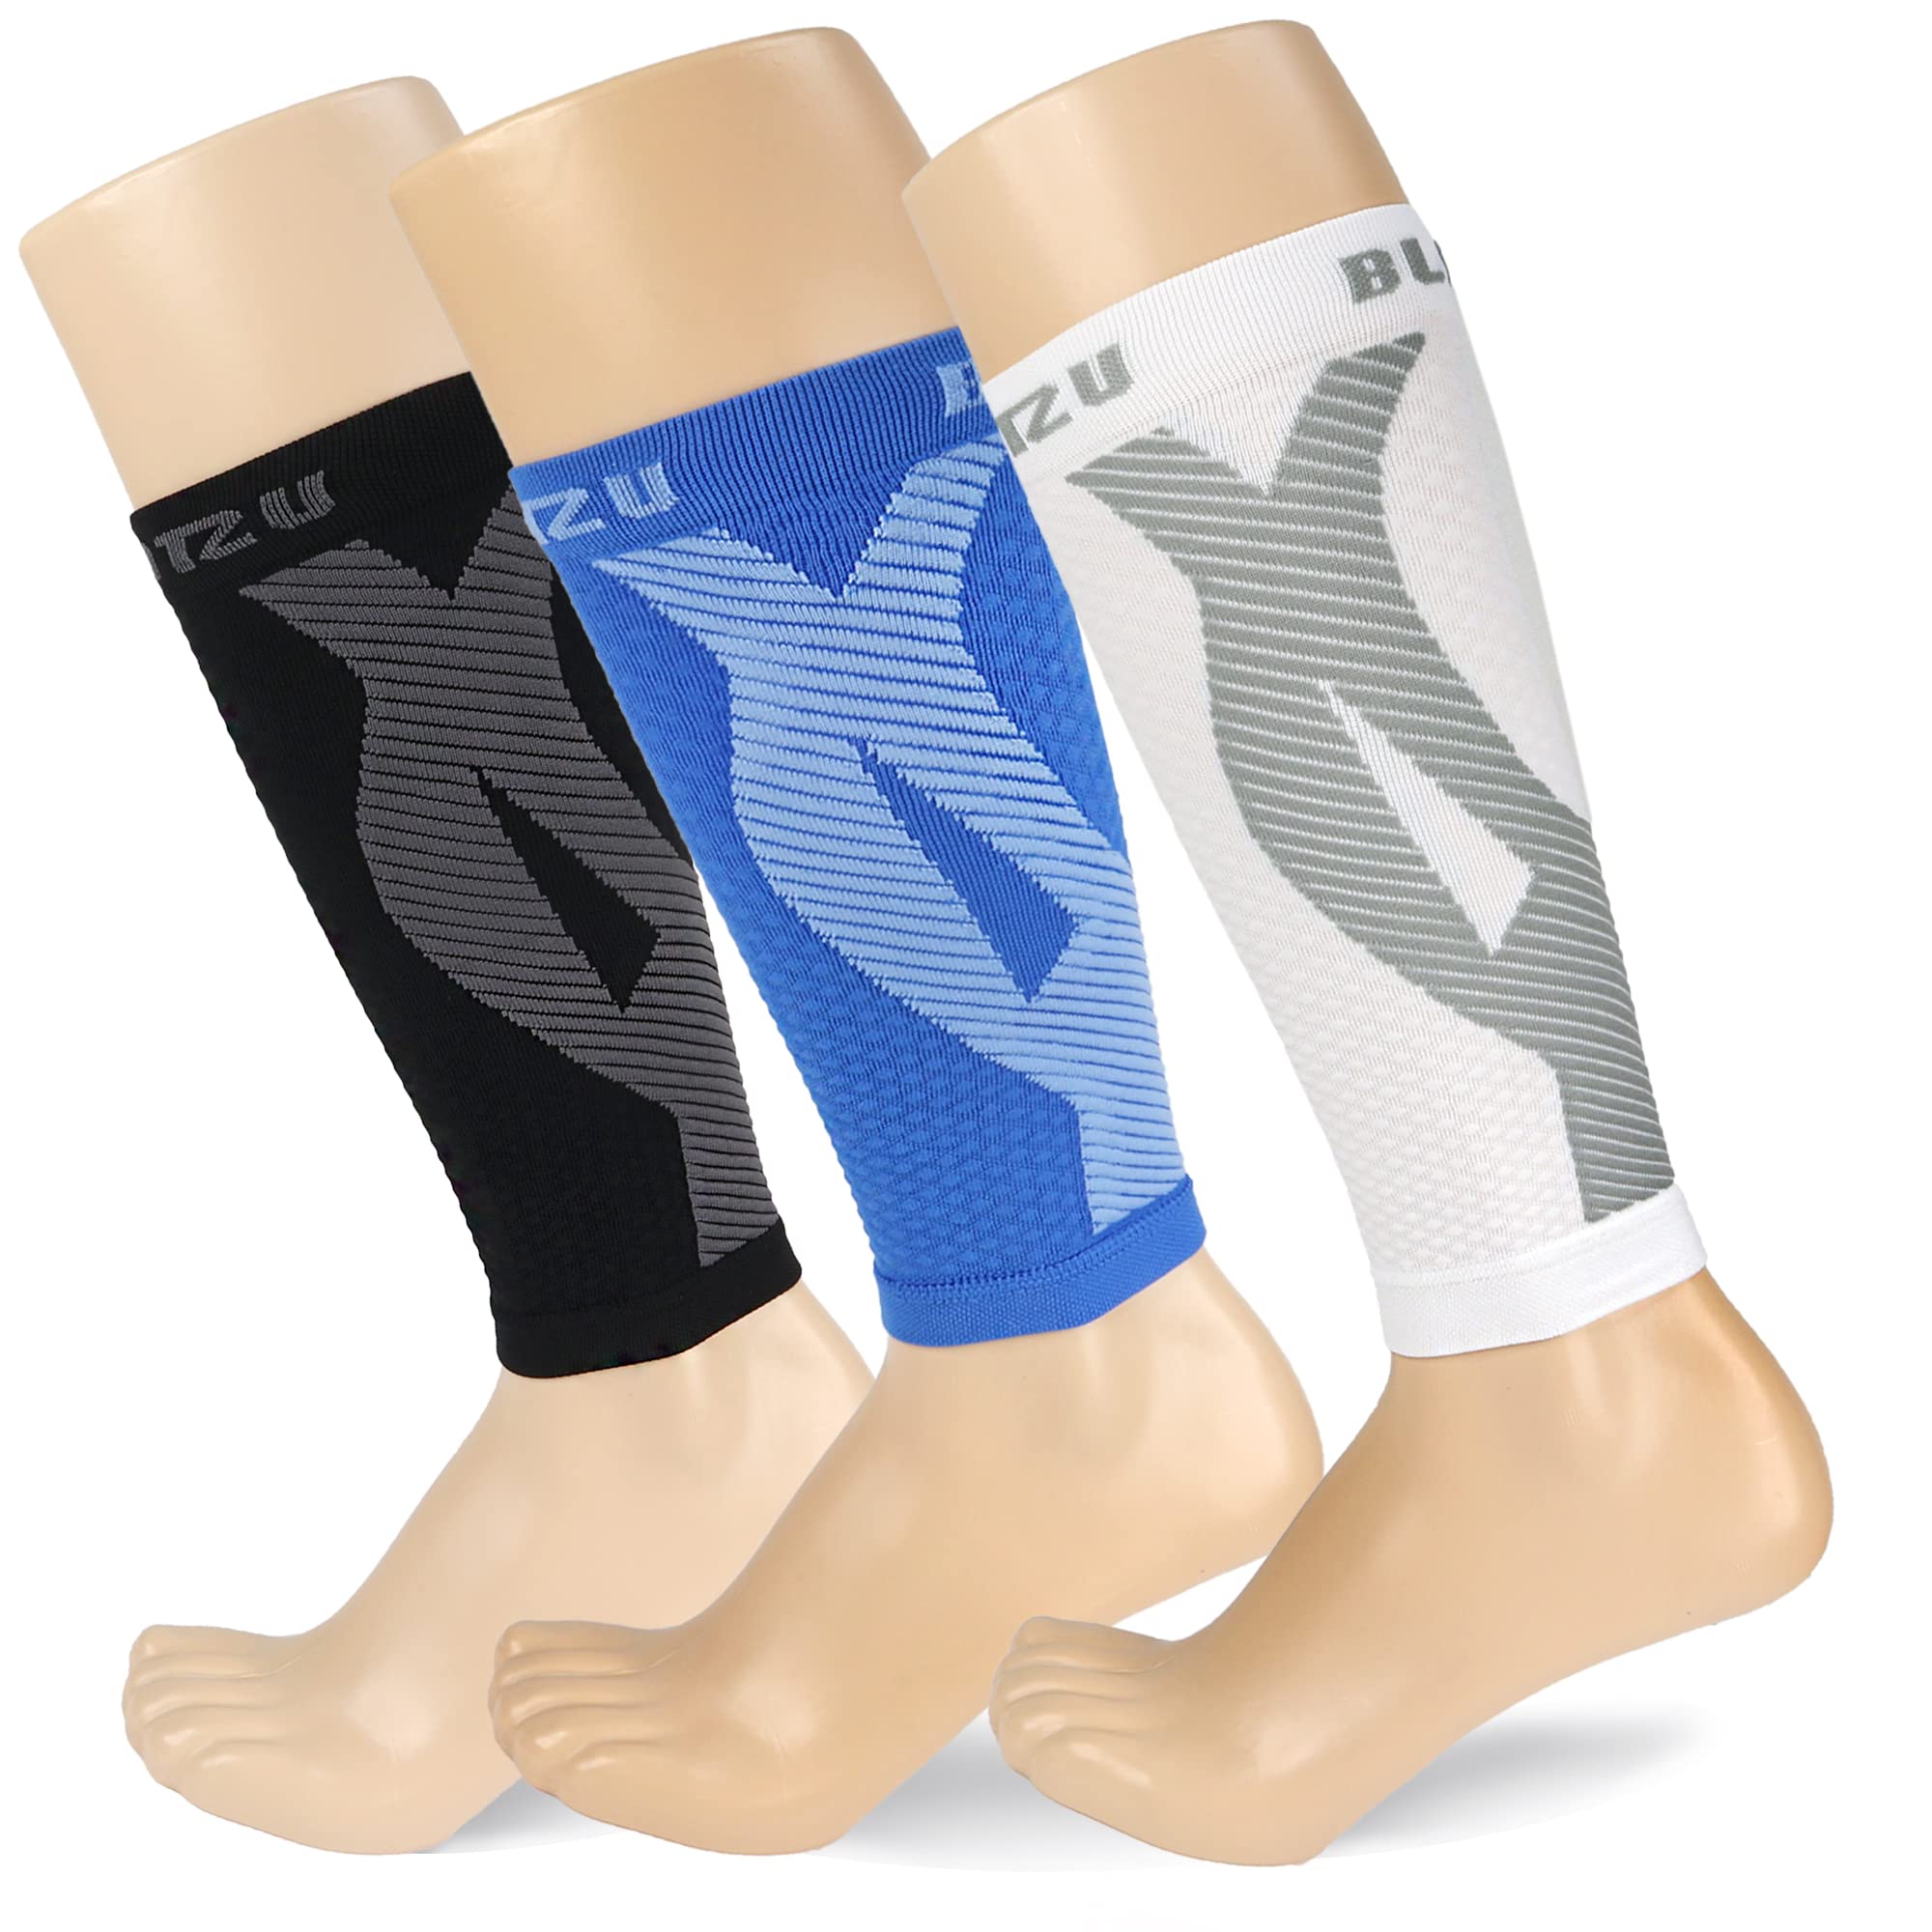 BLITZU 3 Pairs Calf Compression Sleeves for Women and Men Size L-XL, One  Blue, One Black, One White Calf Sleeve, Leg Compression Sleeve for Calf  Pain